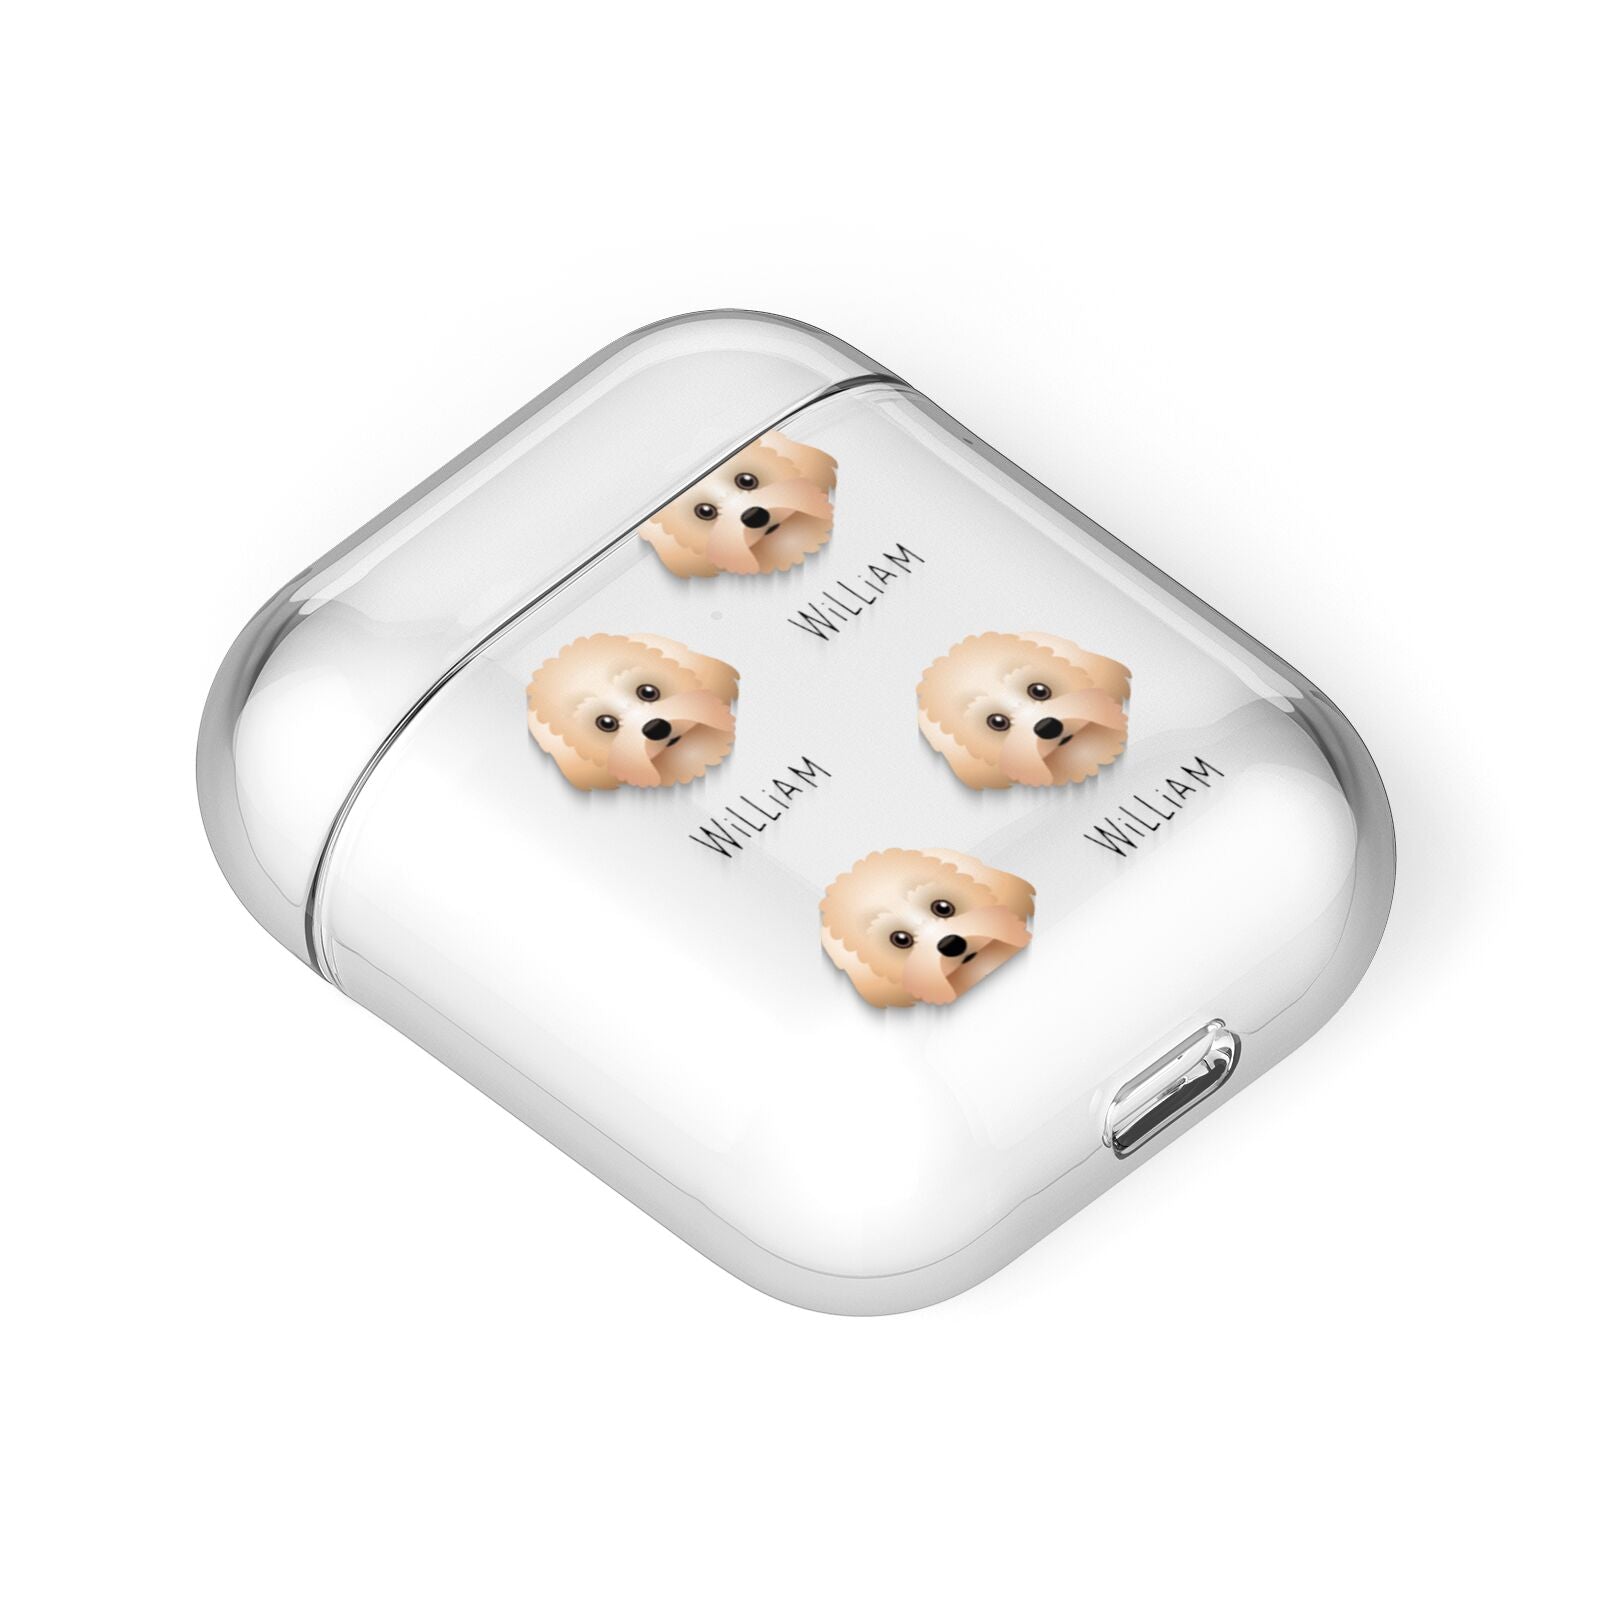 Malti Poo Icon with Name AirPods Case Laid Flat